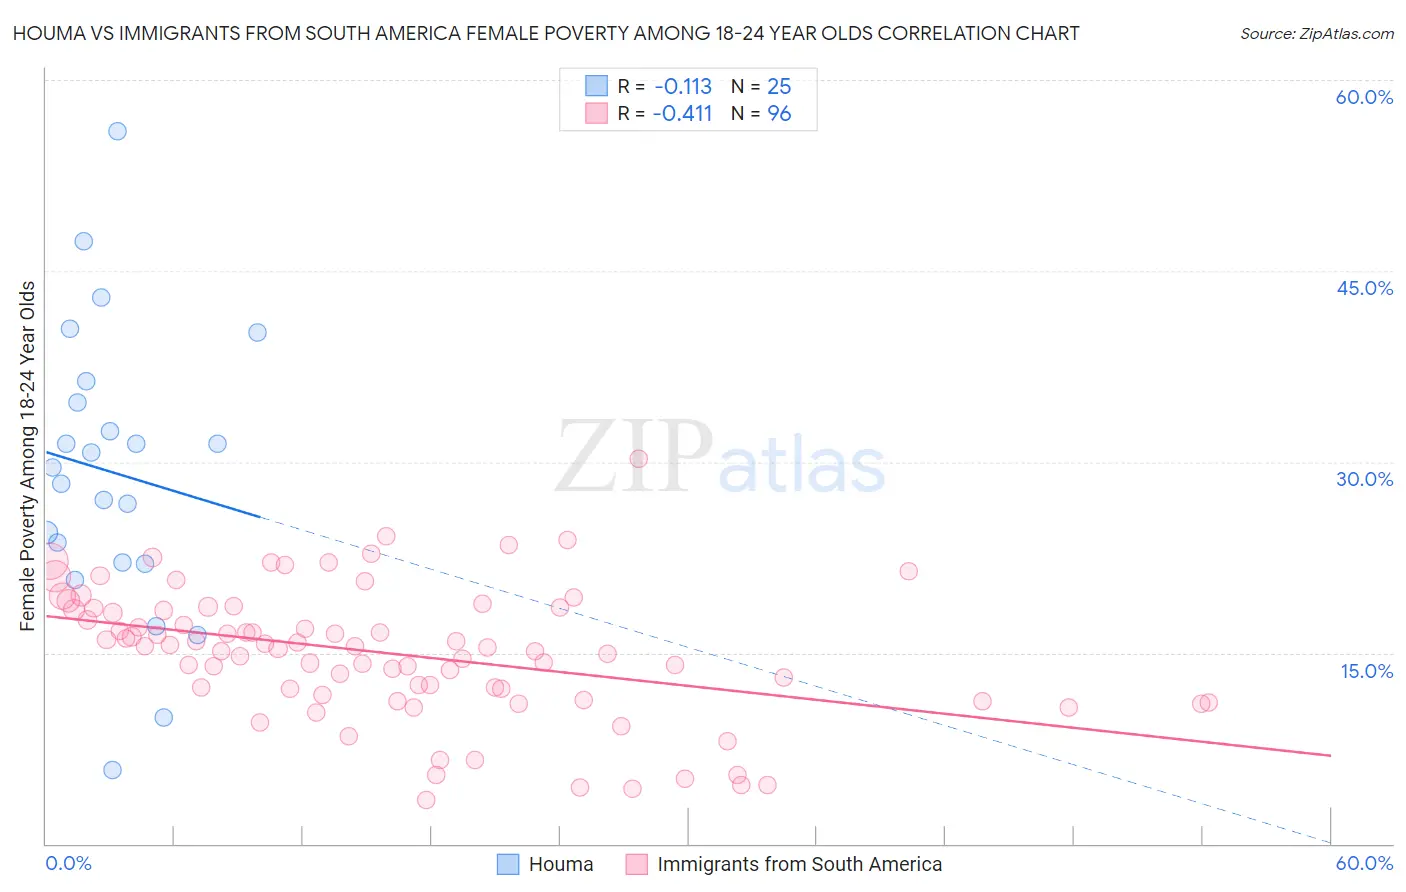 Houma vs Immigrants from South America Female Poverty Among 18-24 Year Olds